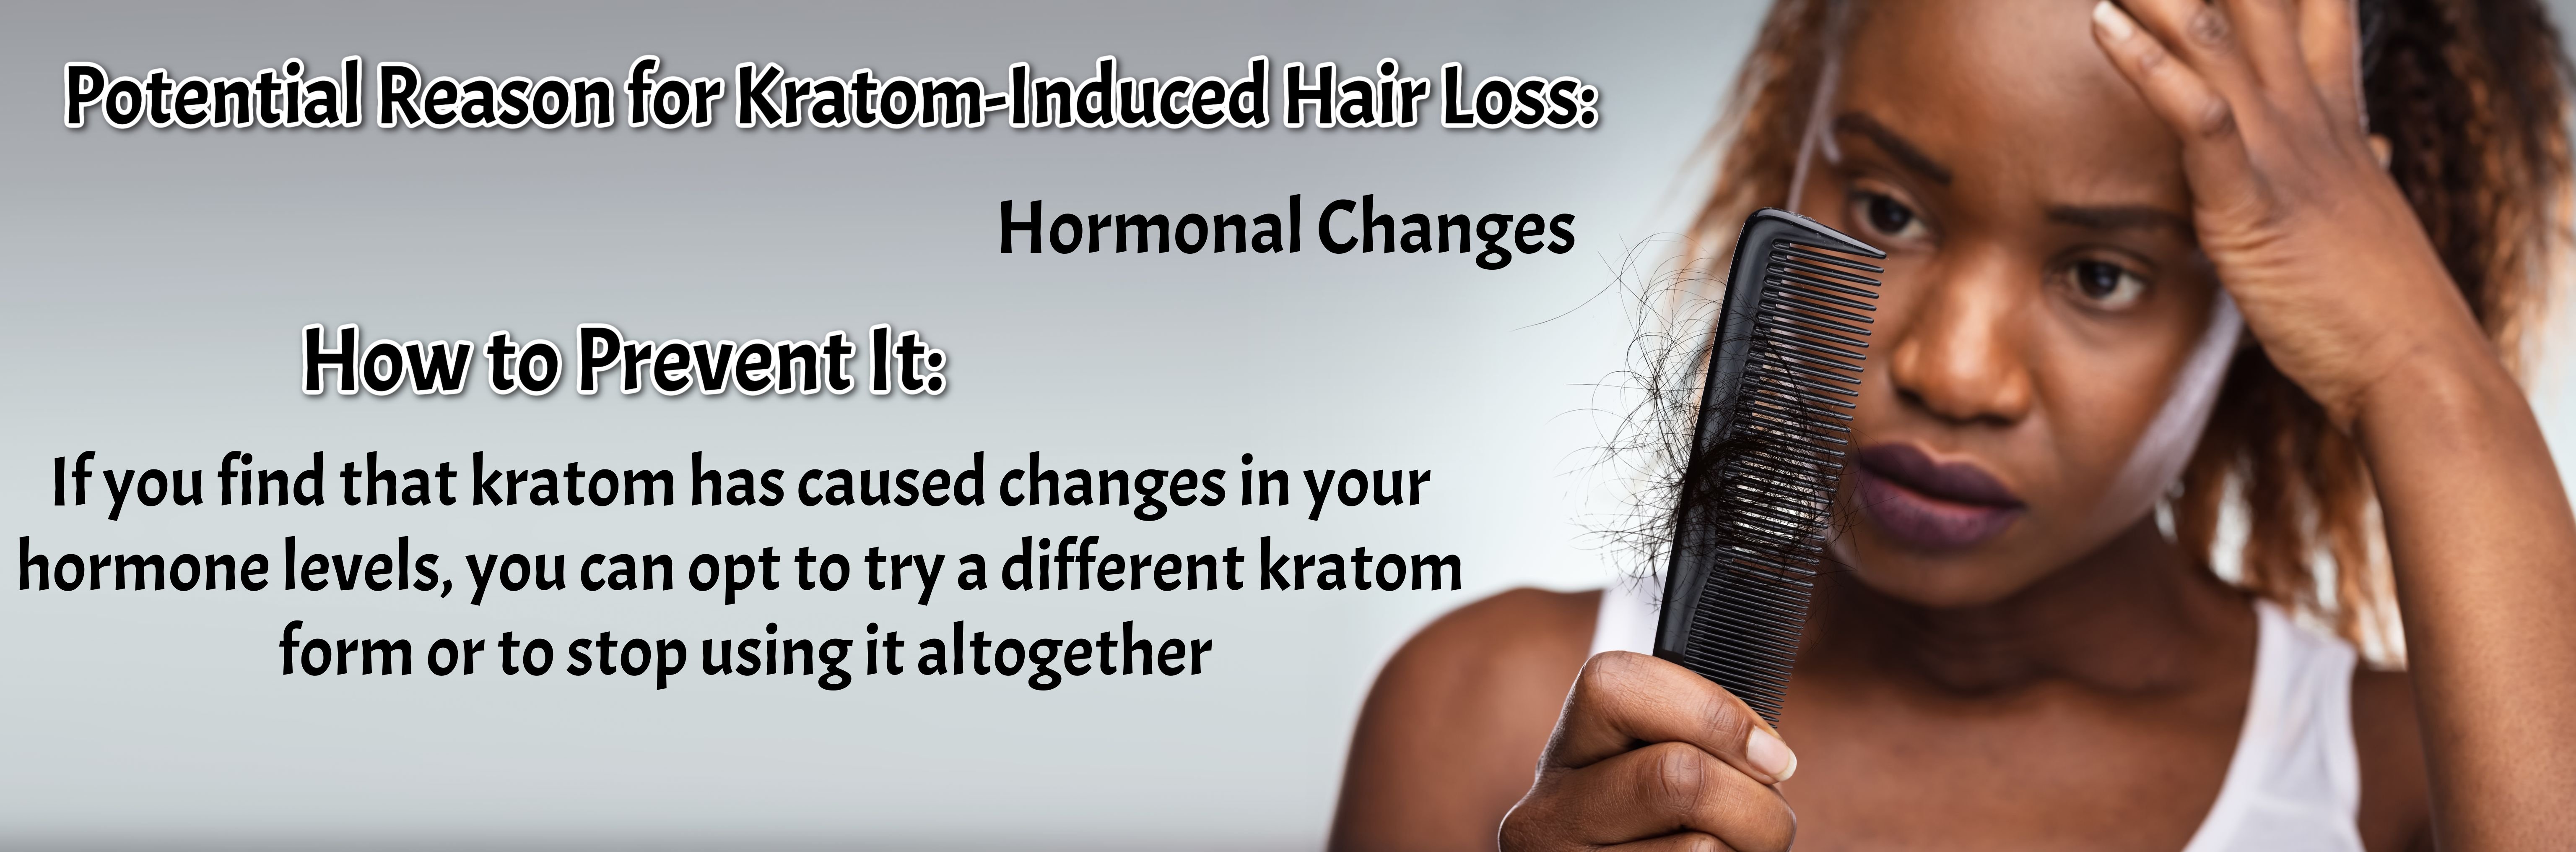 image of potential reason for kratom induced hair loss and how to prevent it